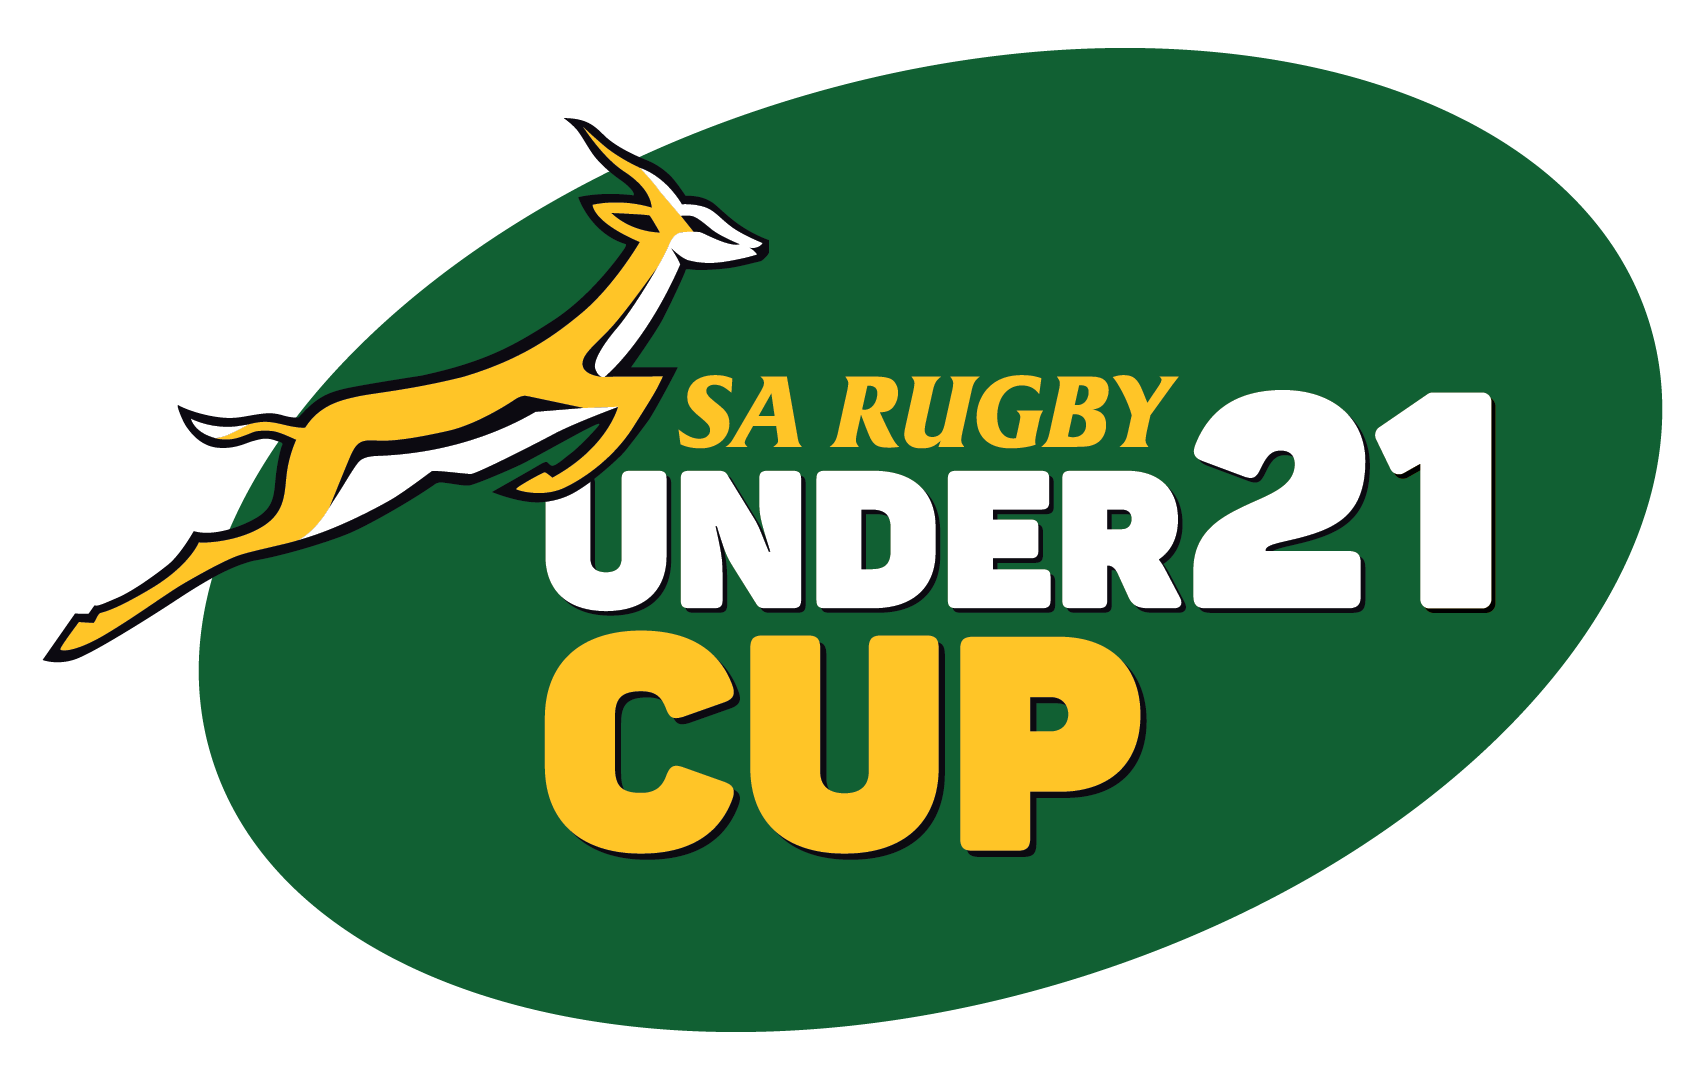 SA RUGBY UNDER-21 CUP